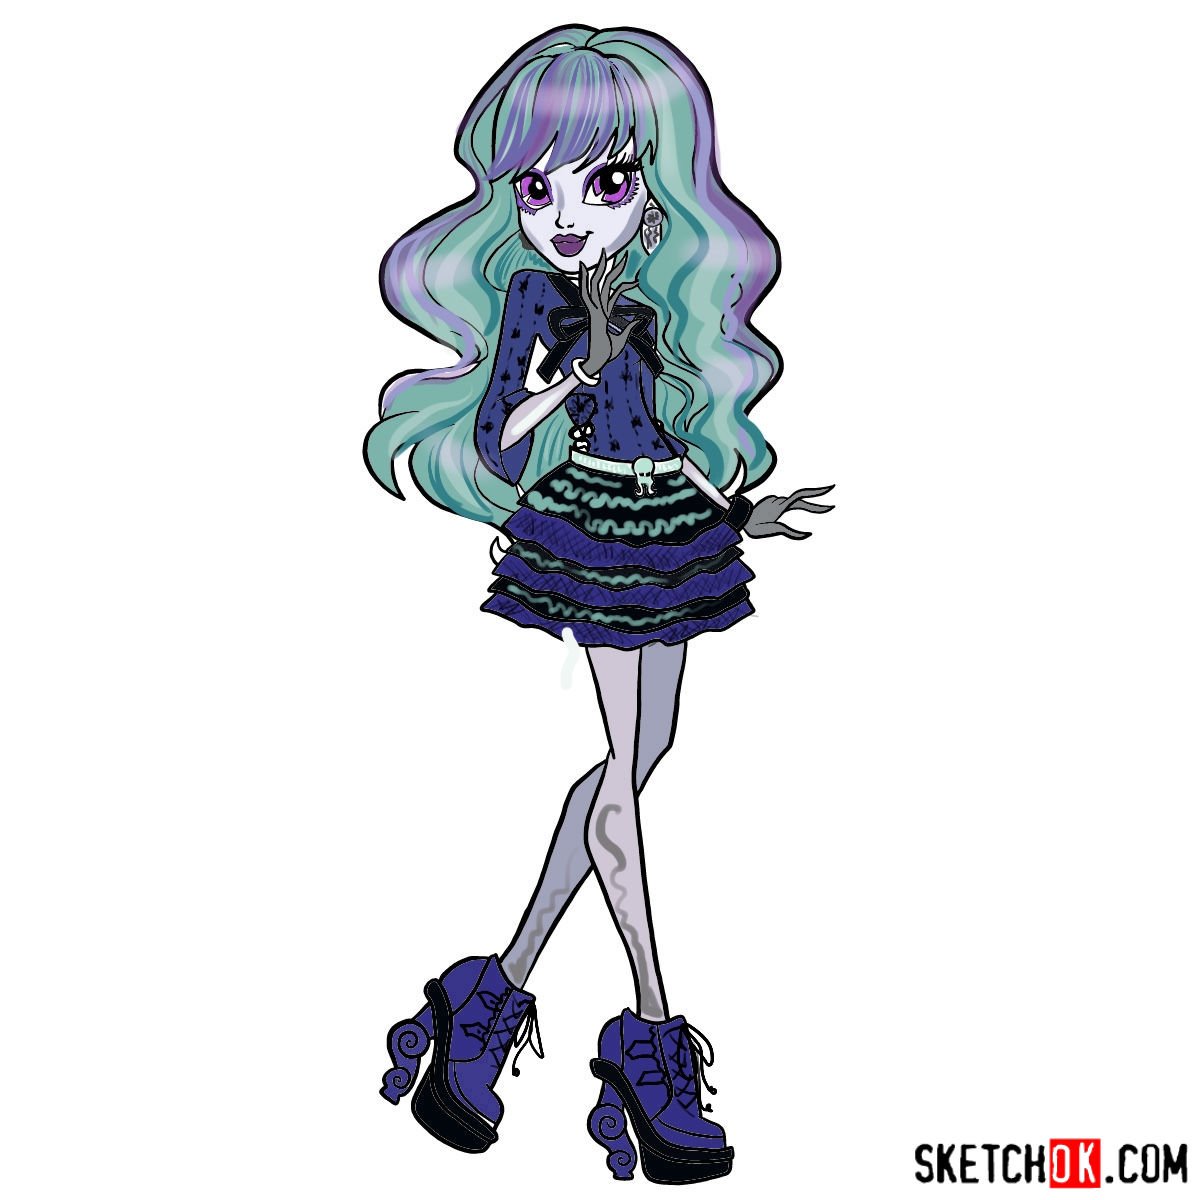 How to draw Twyla from Monster High